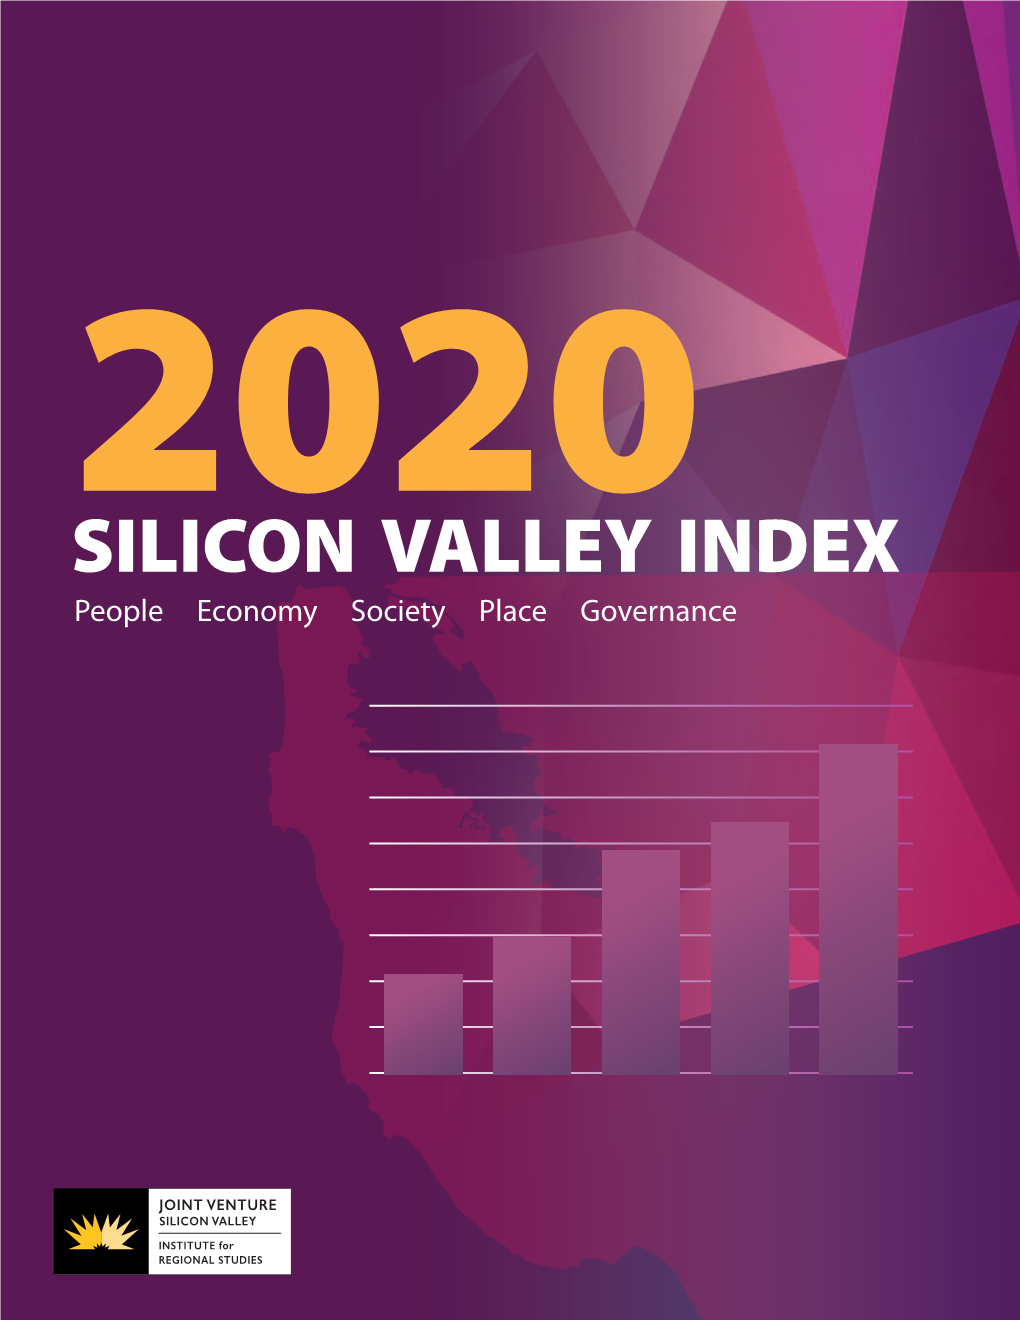 2020 Silicon Valley Index ABOUT the 2020 SILICON VALLEY INDEX